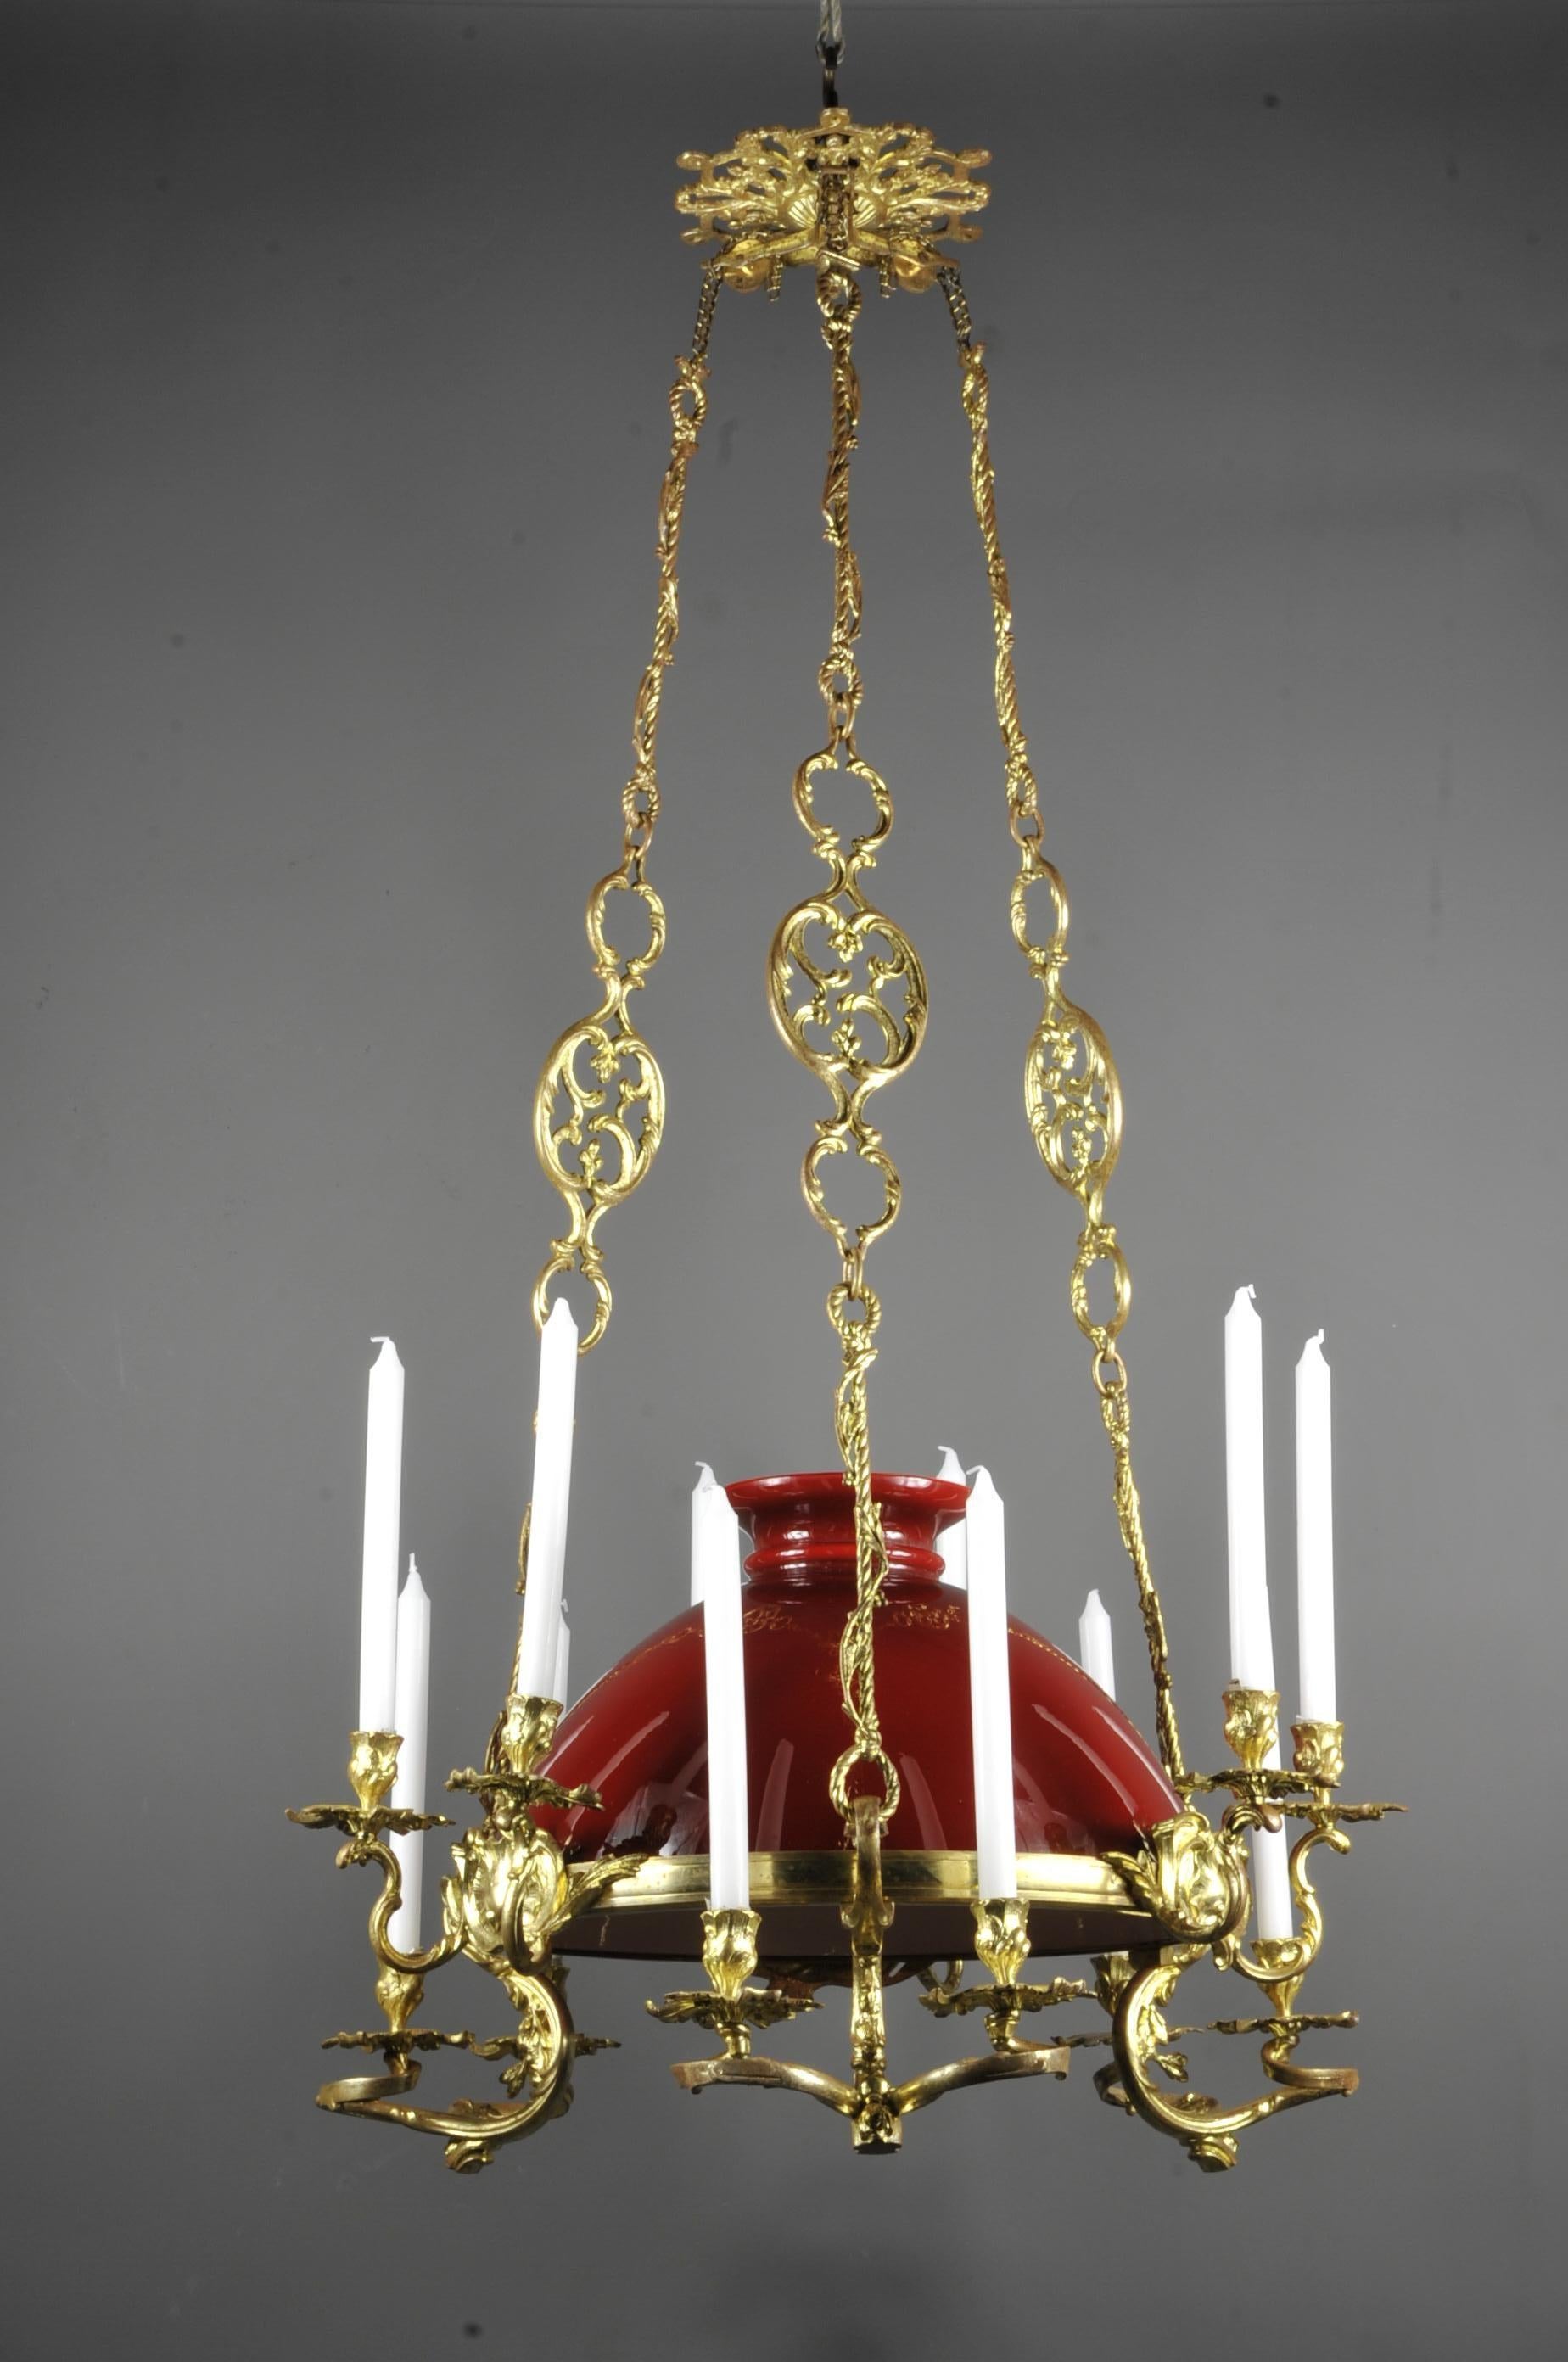 Imposing gilt and chiseled bronze chandelier with 12 belt lights in ornaments of volutes, shells and acanthus foliage of rockery inspiration.
In the center a large dome lampshade in red opaline with a white interior, the whole is suspended by three